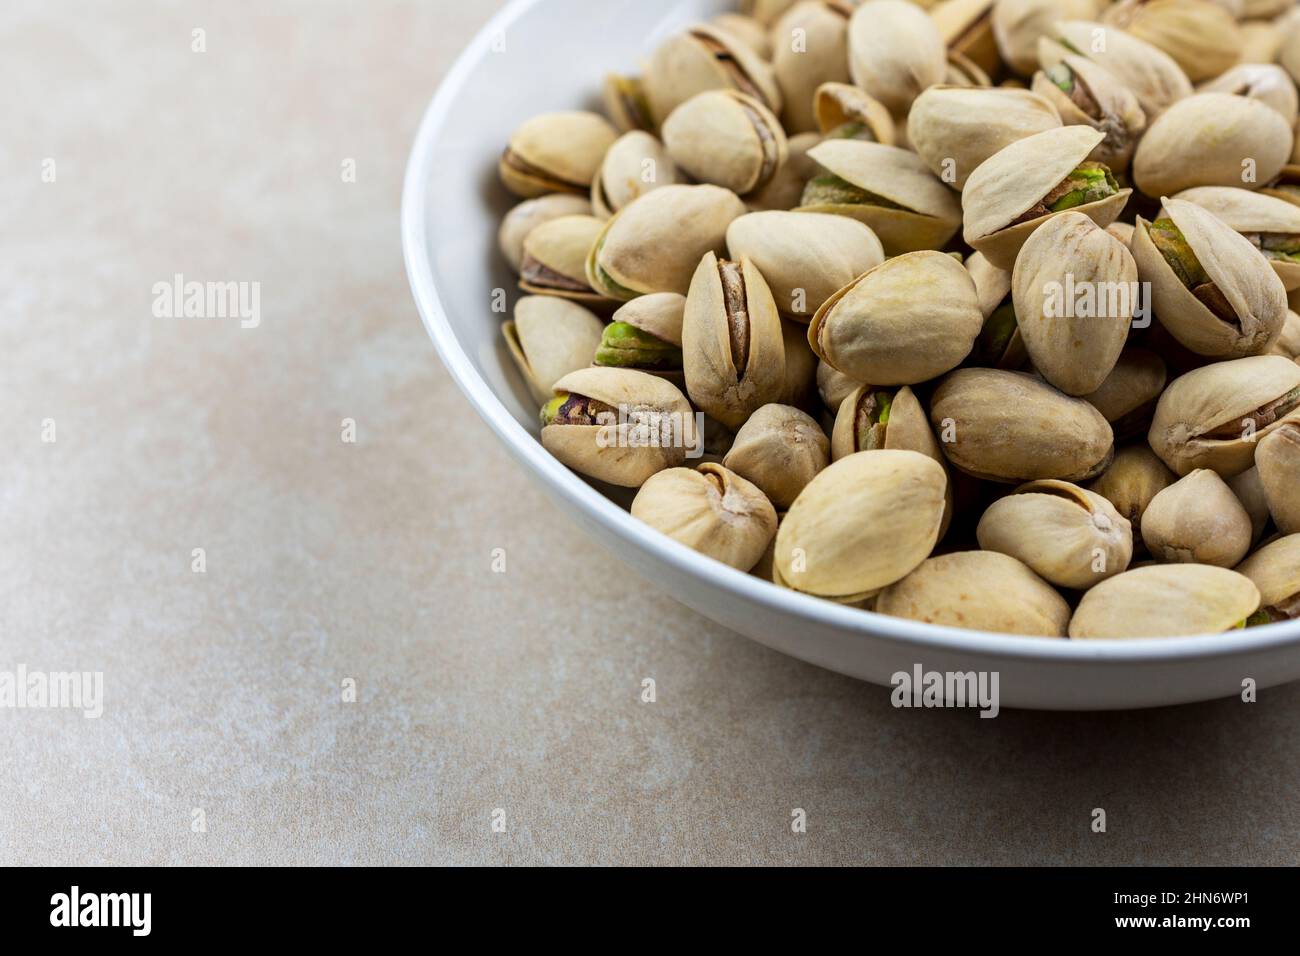 Side view of a white bowl of pistachios on a tile surface. Stock Photo